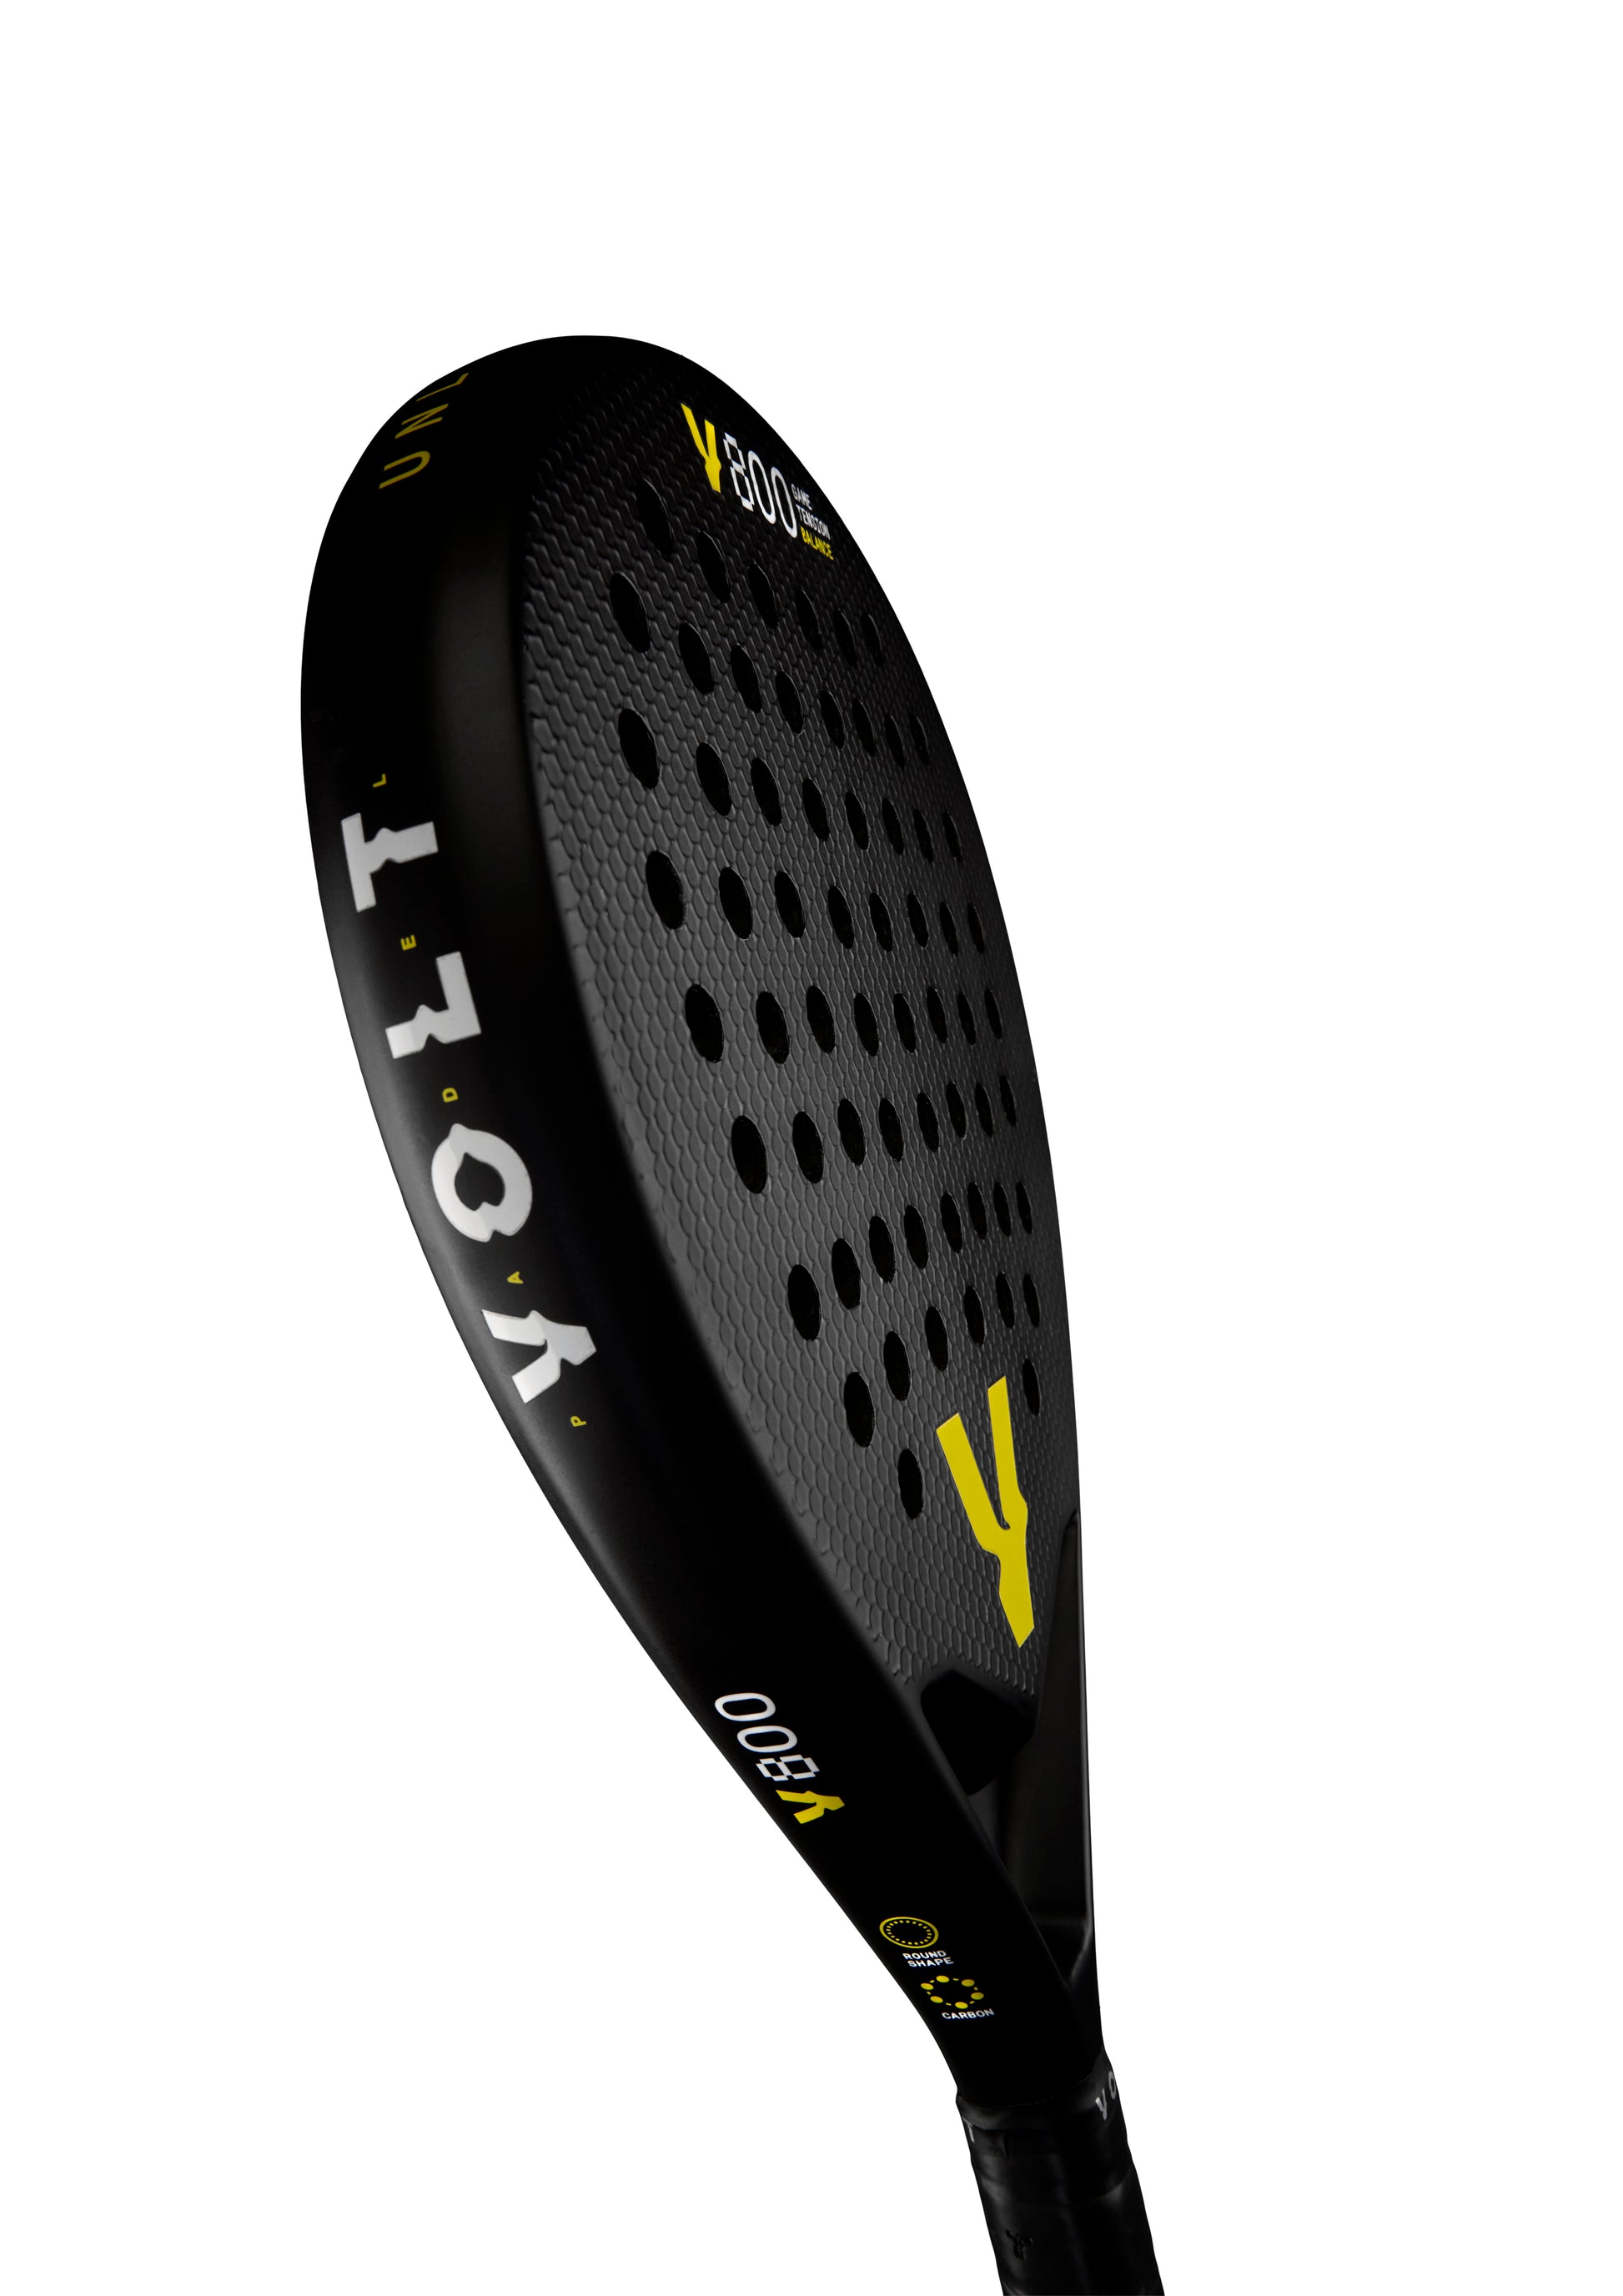 The Volt 800 V23 Padel Racket available for sale at GSM Sports.